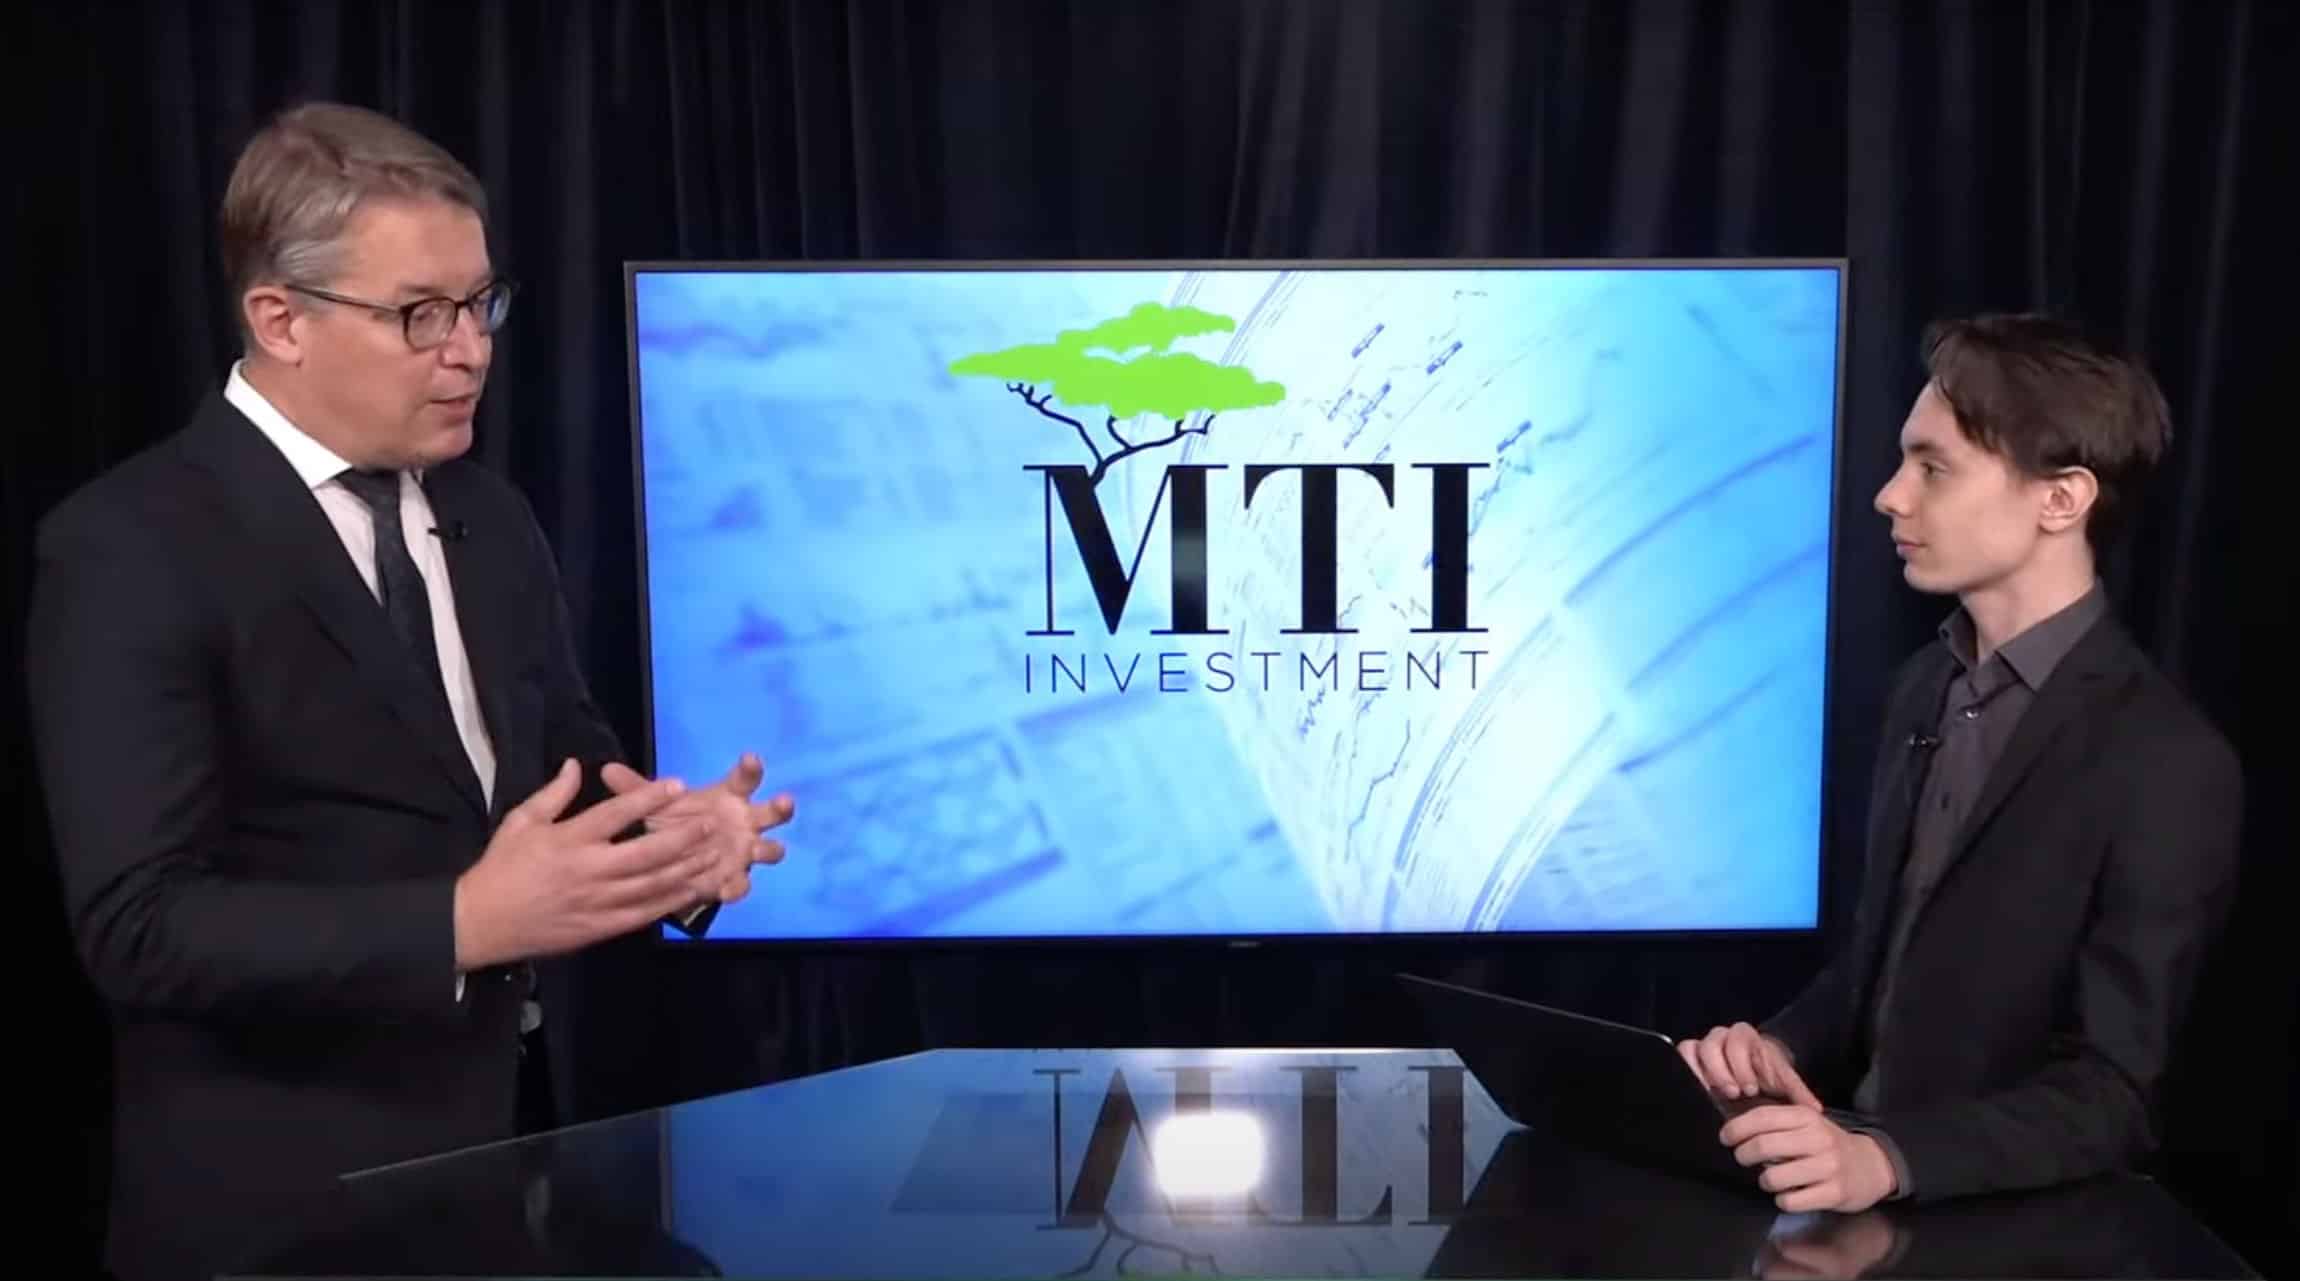 MTI Investment co founder presenting results of the company in a studio